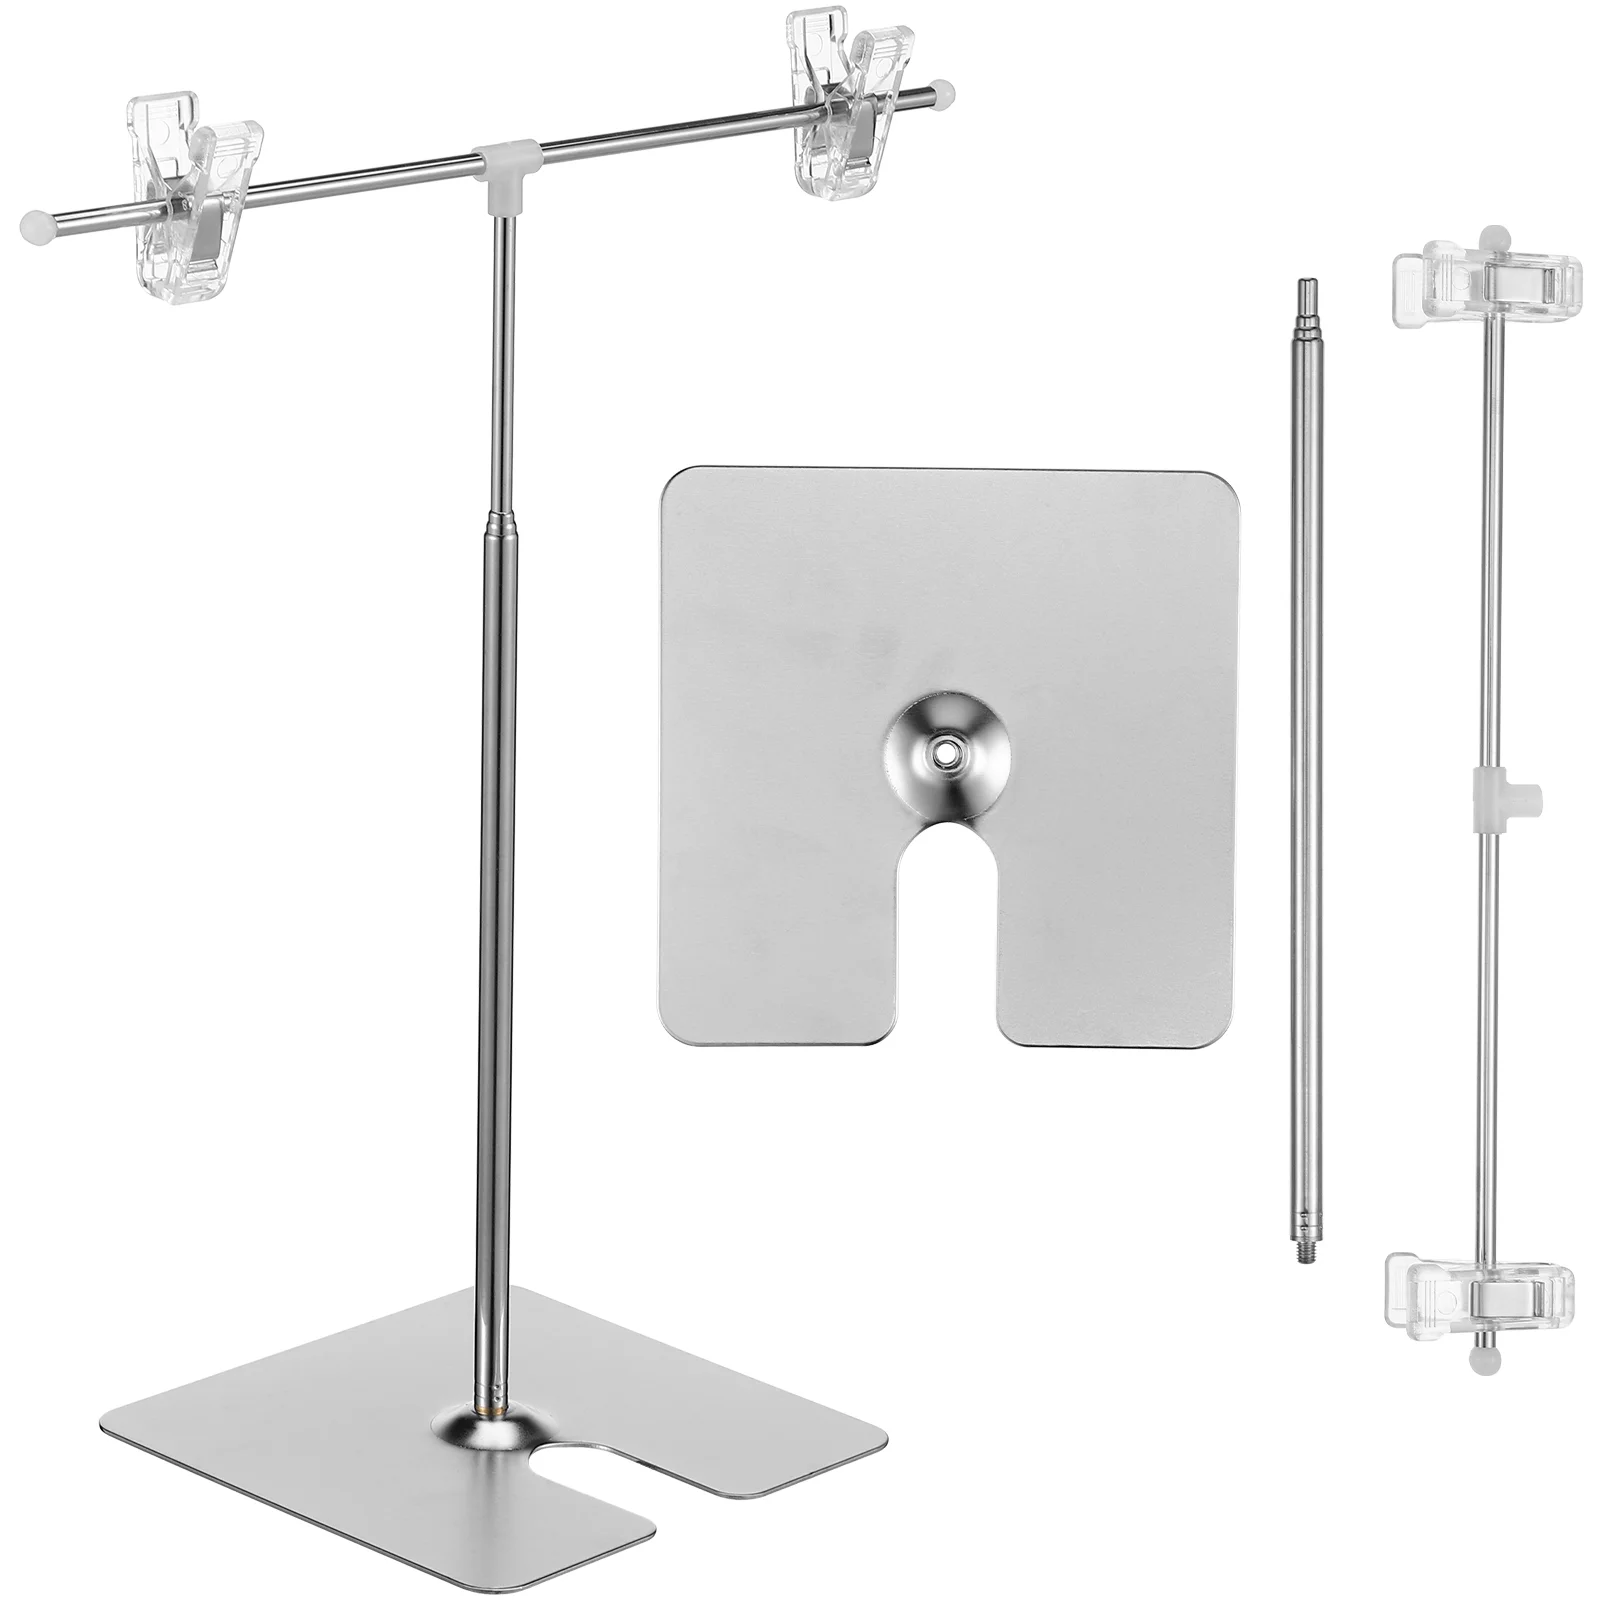 Floor Standing Sign Holder Stainless Steel Poster Display Shelf Table Top Easel 2 pcs stainless steel poster stand display shelf holder sign banner stands for retractable advertising showing